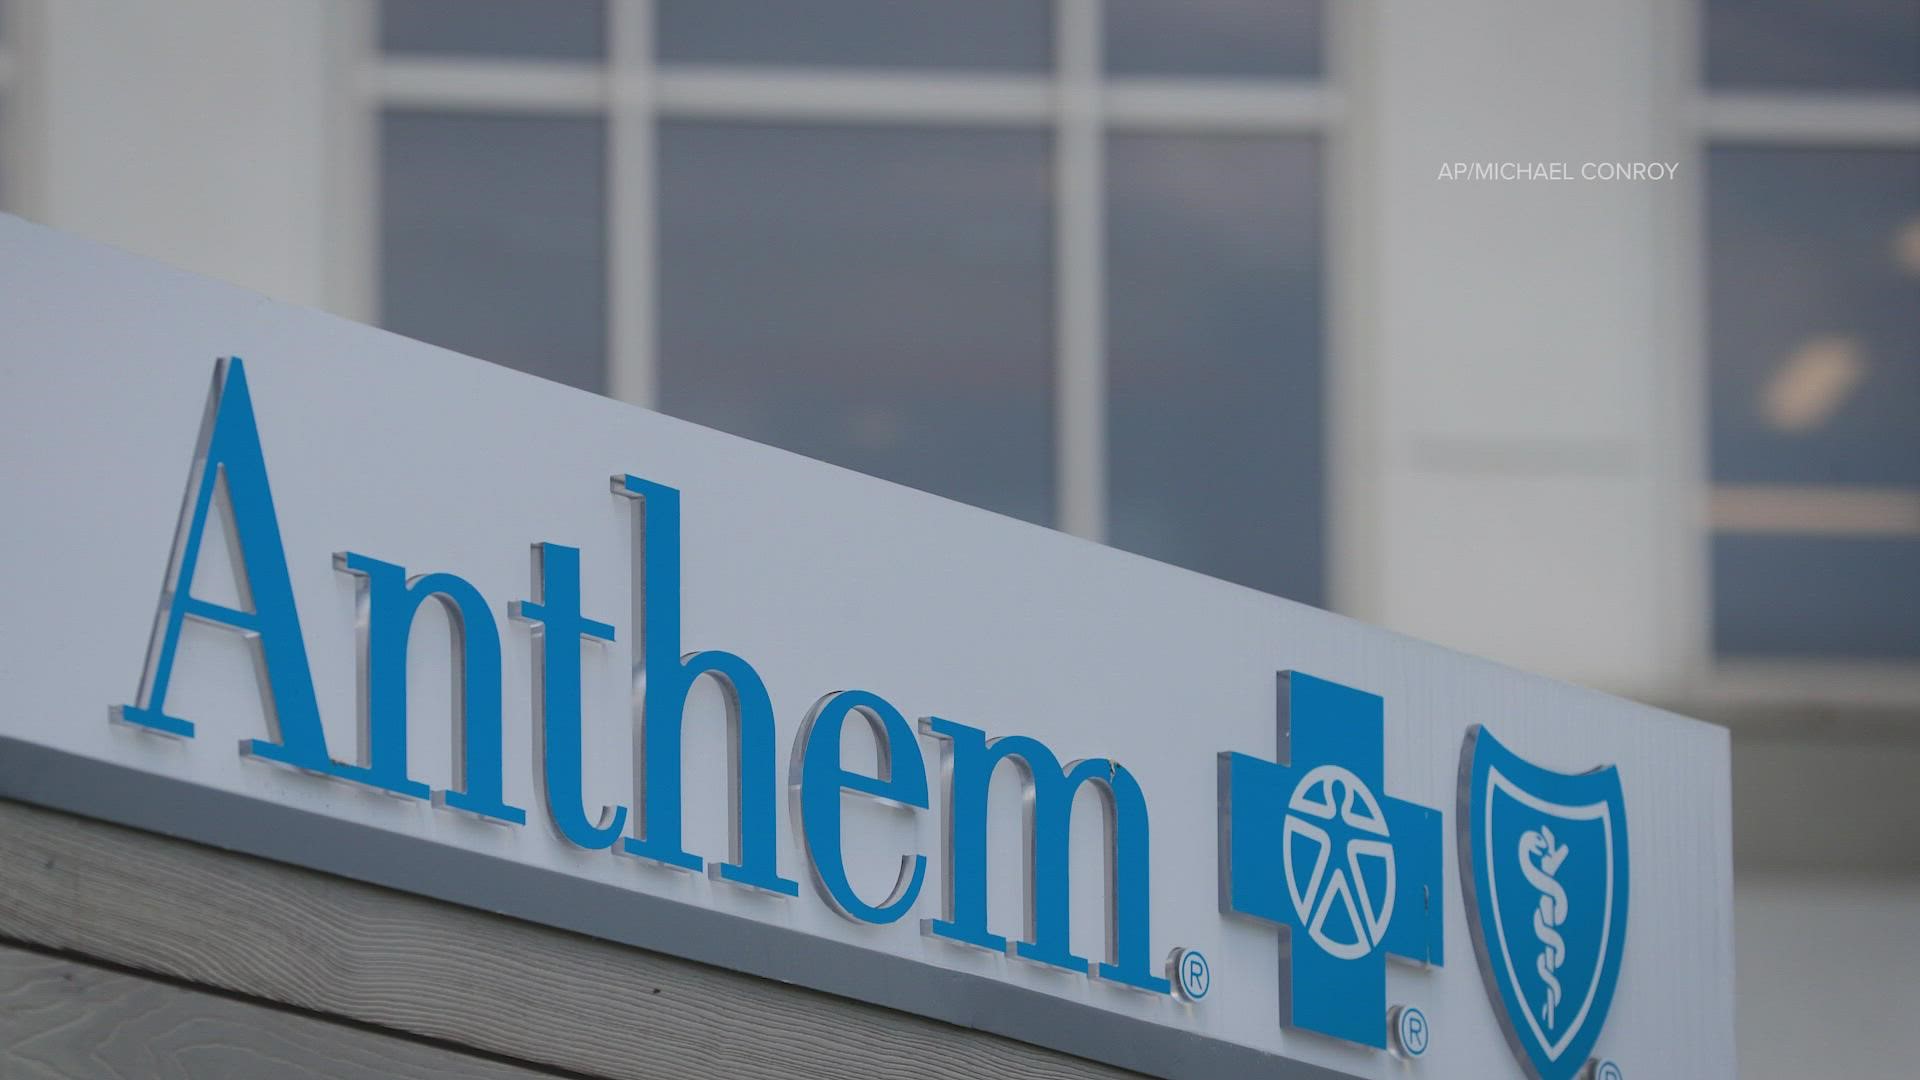 With patient care potentially compromised, Maine's Board of Insurance is examining Anthem's provider-related issues.